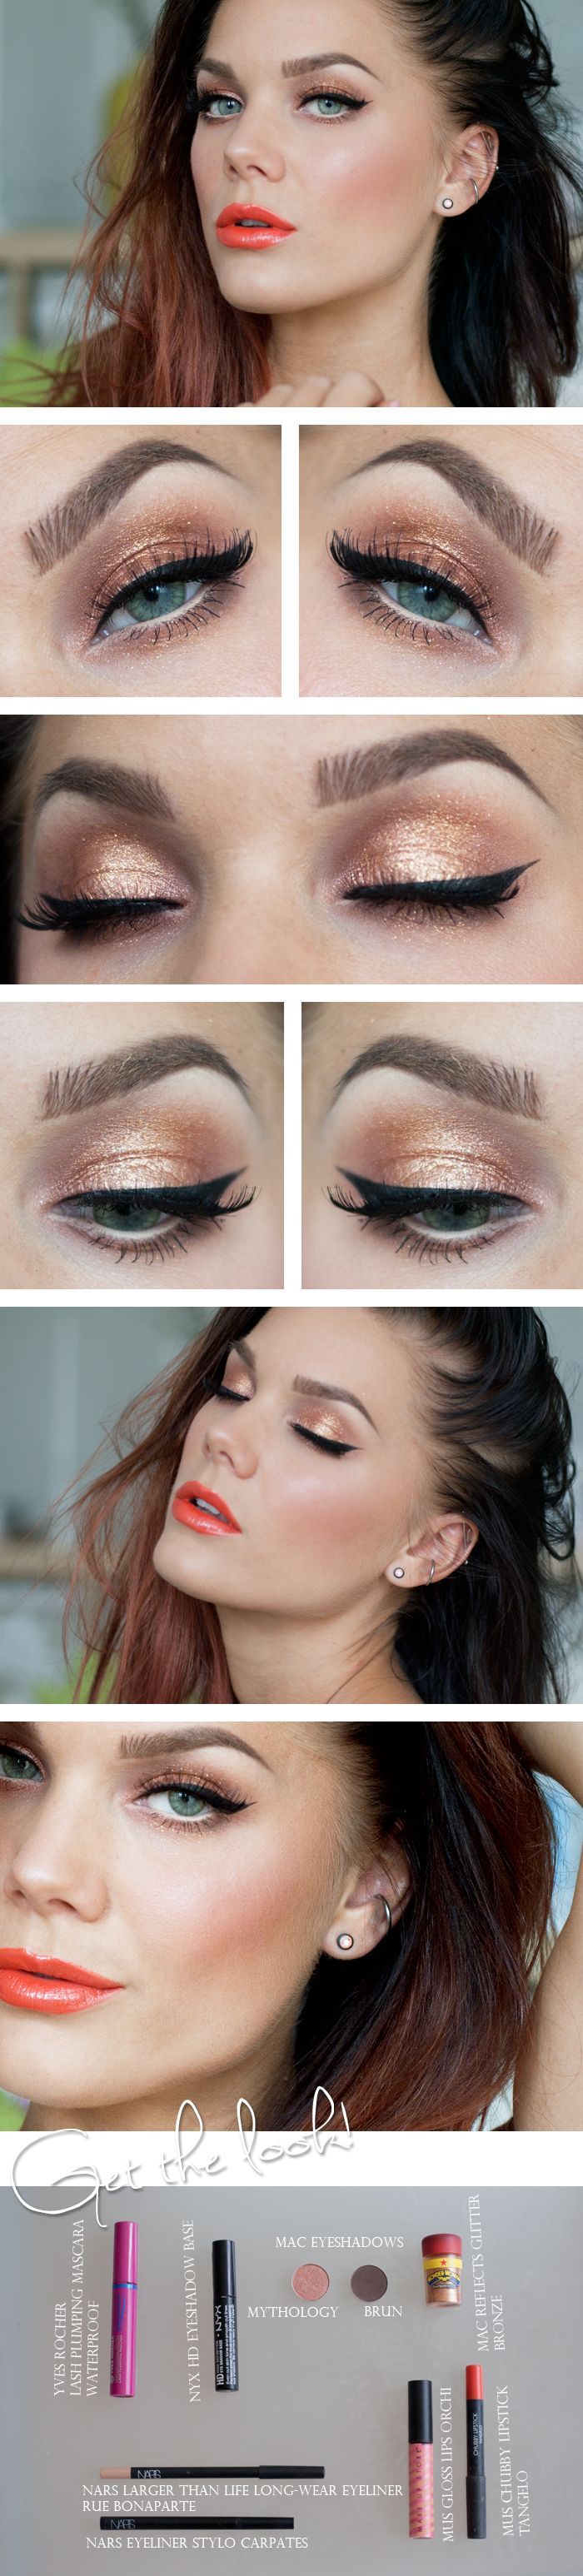 Todays Look : “Tangelo” -Linda Hallberg (a gorgeous orange look from eyes to che